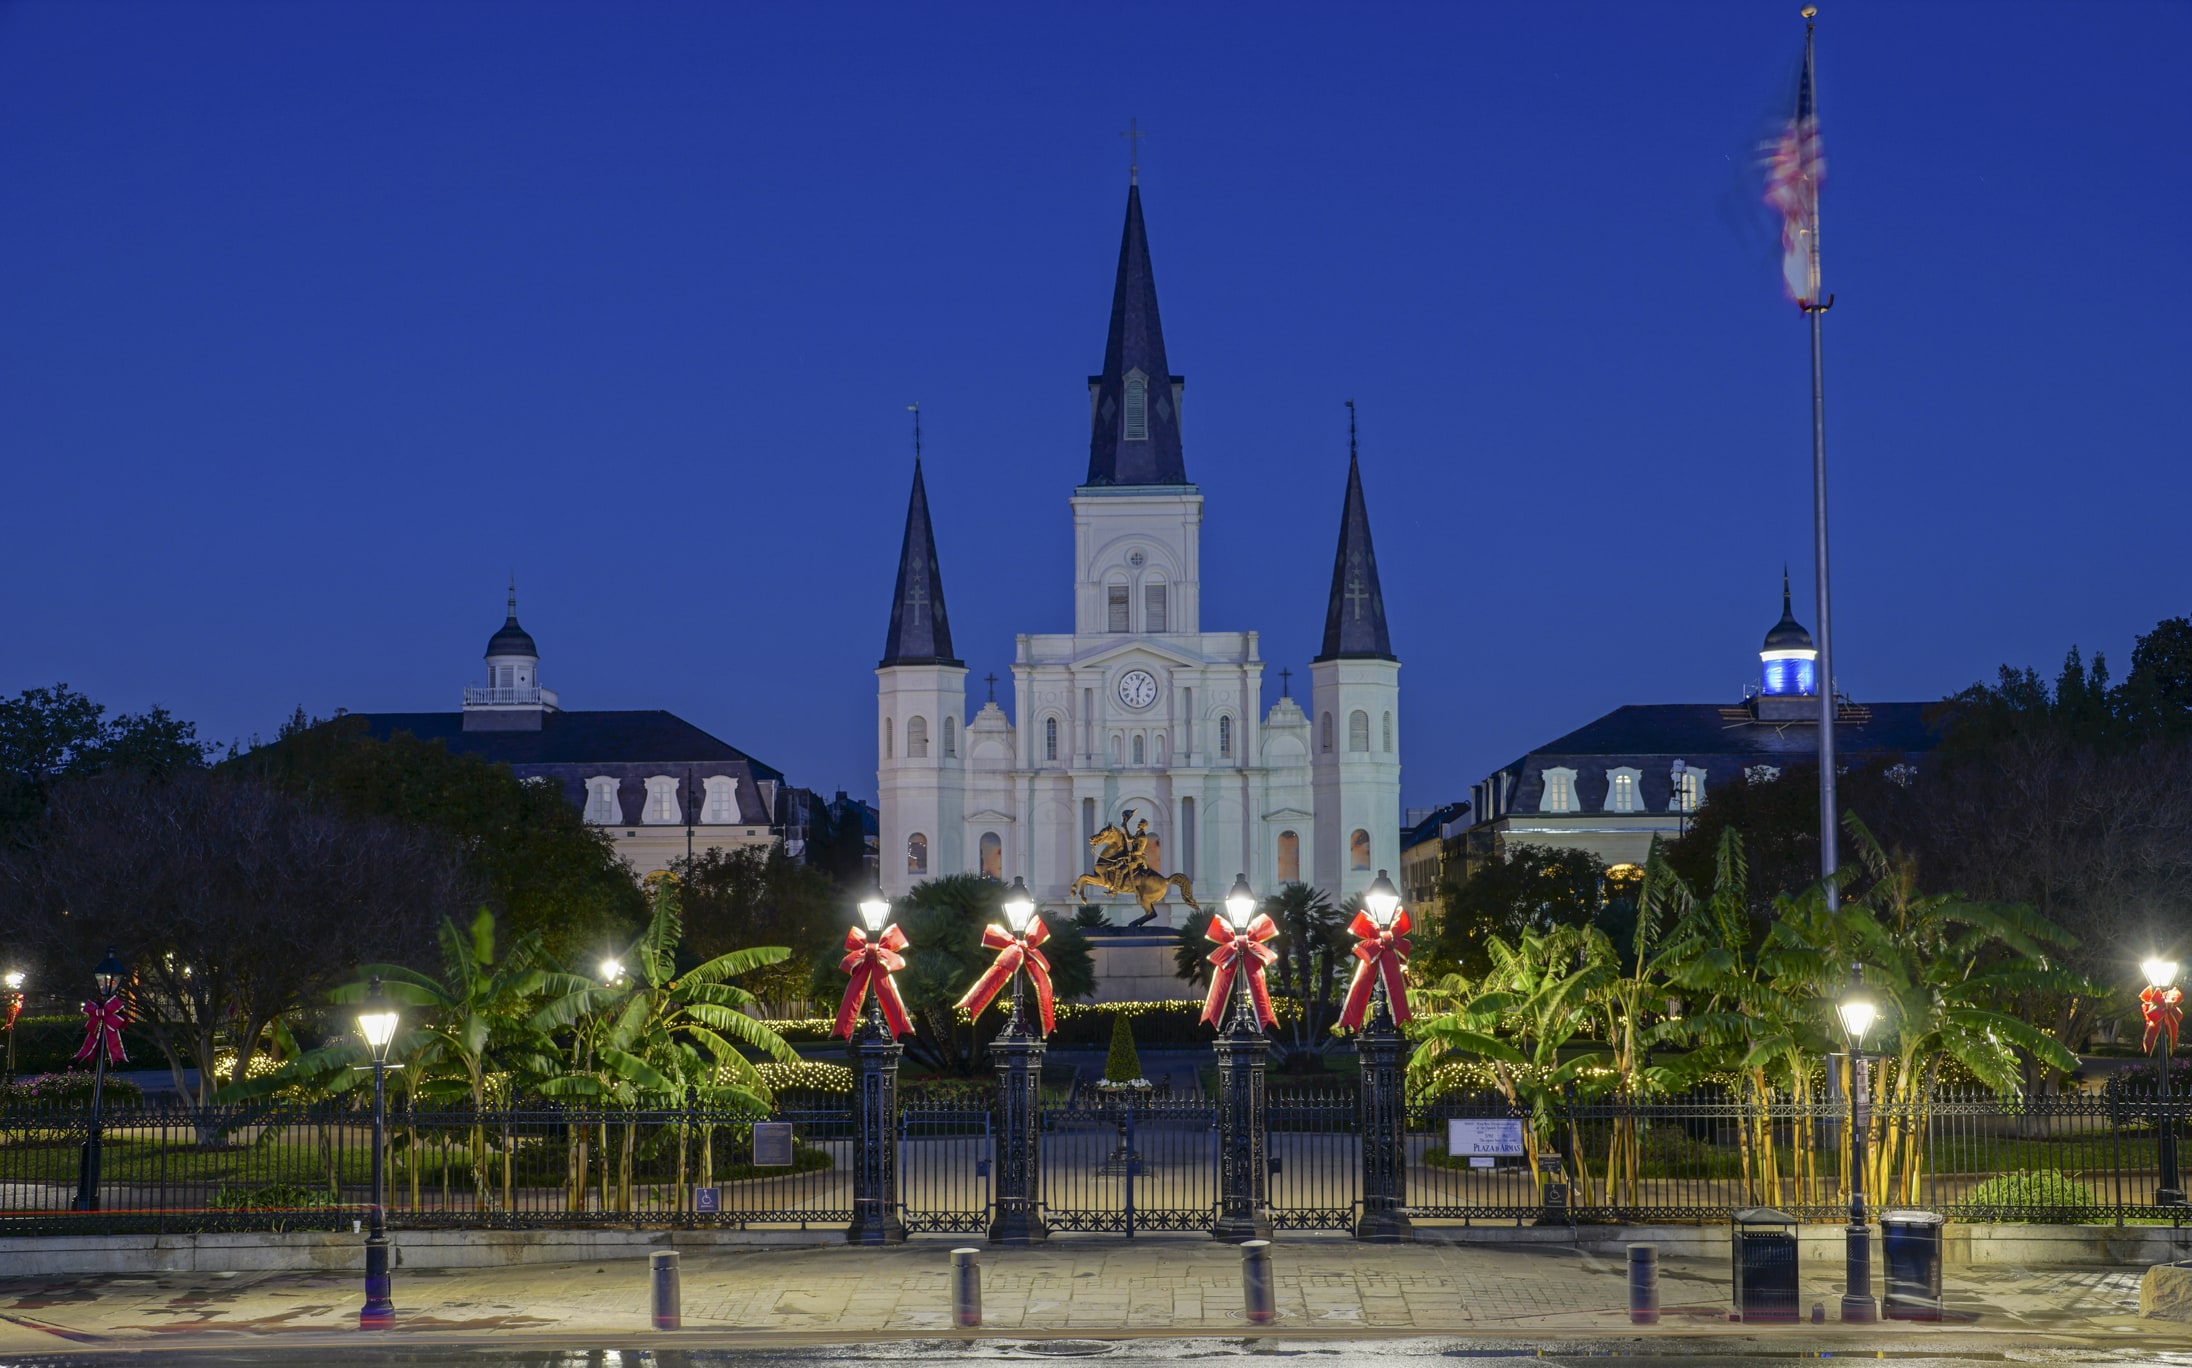 The famous Jackson Square is a historic park in the French Quarter of New Orleans, Louisiana. It was declared a National Historic Landmark in 1960, for its central role in the city's history.